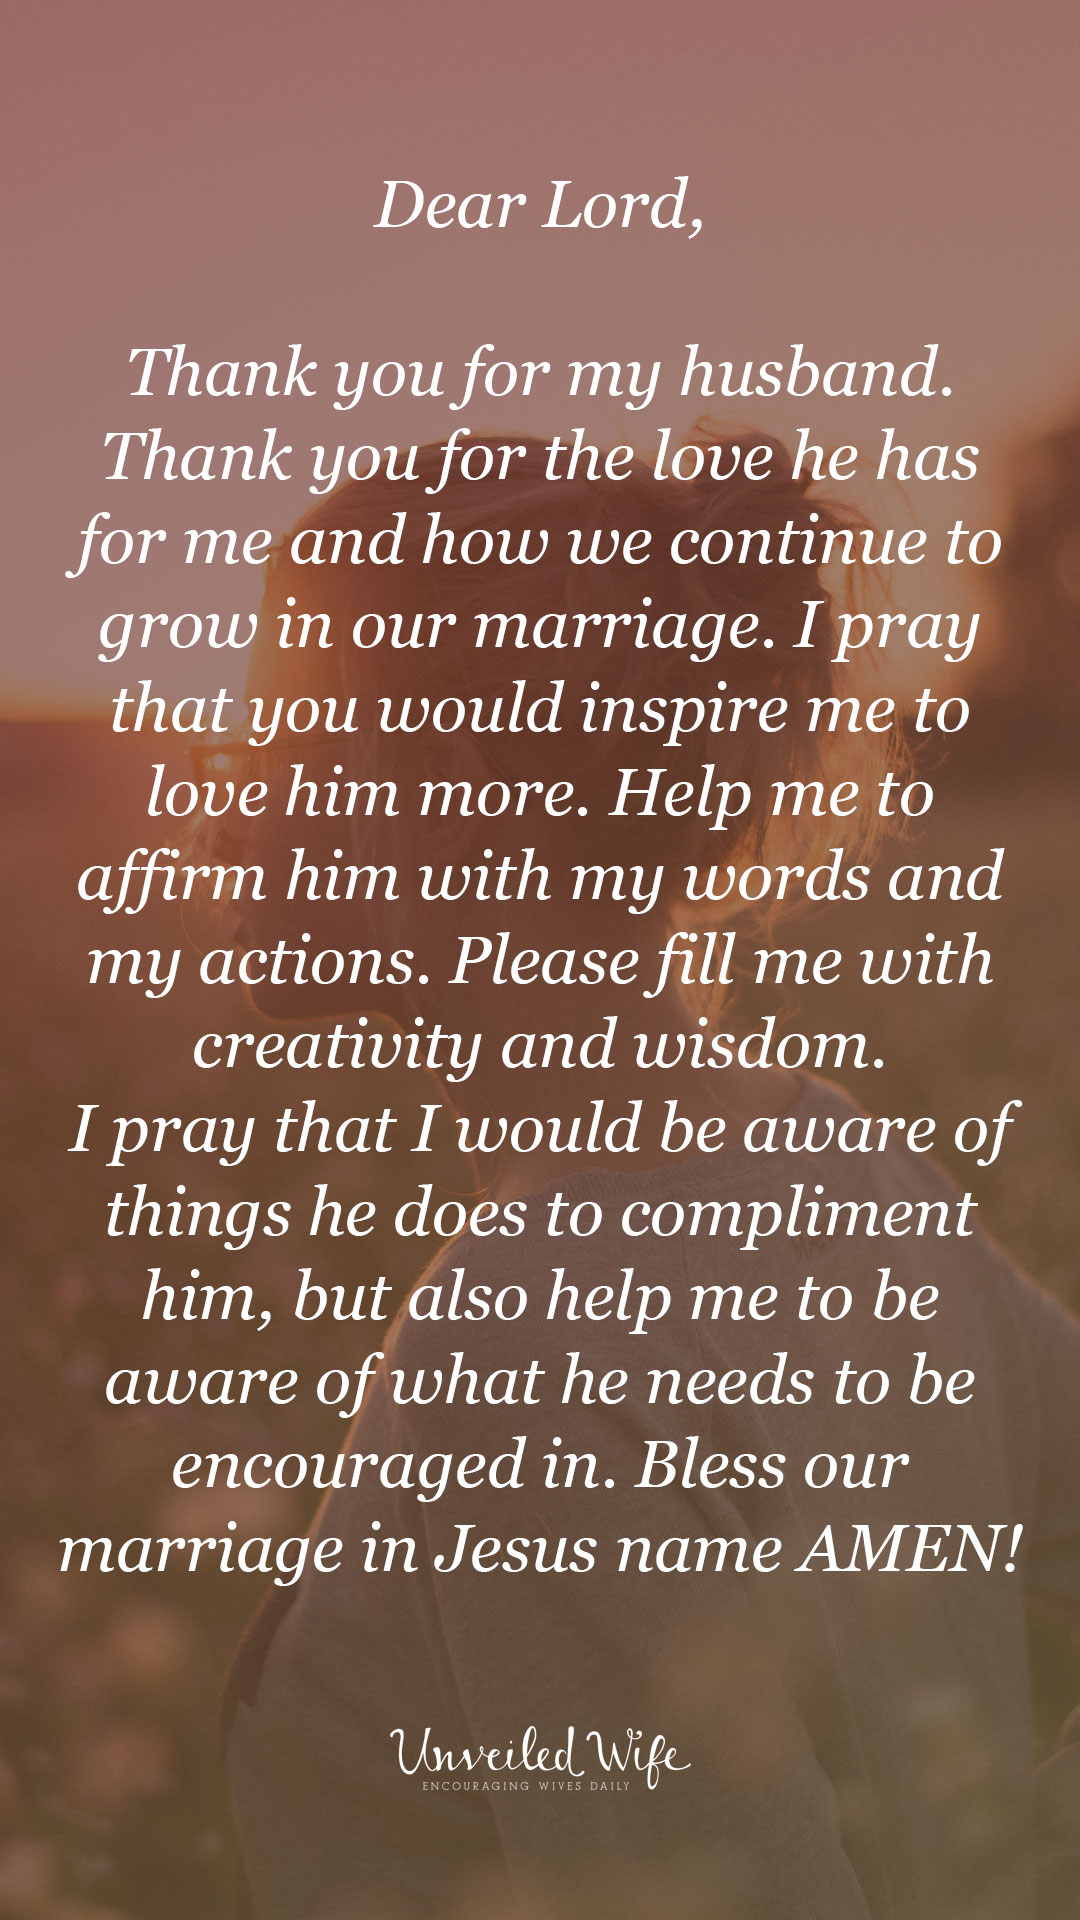 Prayer Of The Day - Cheering For Your Husband